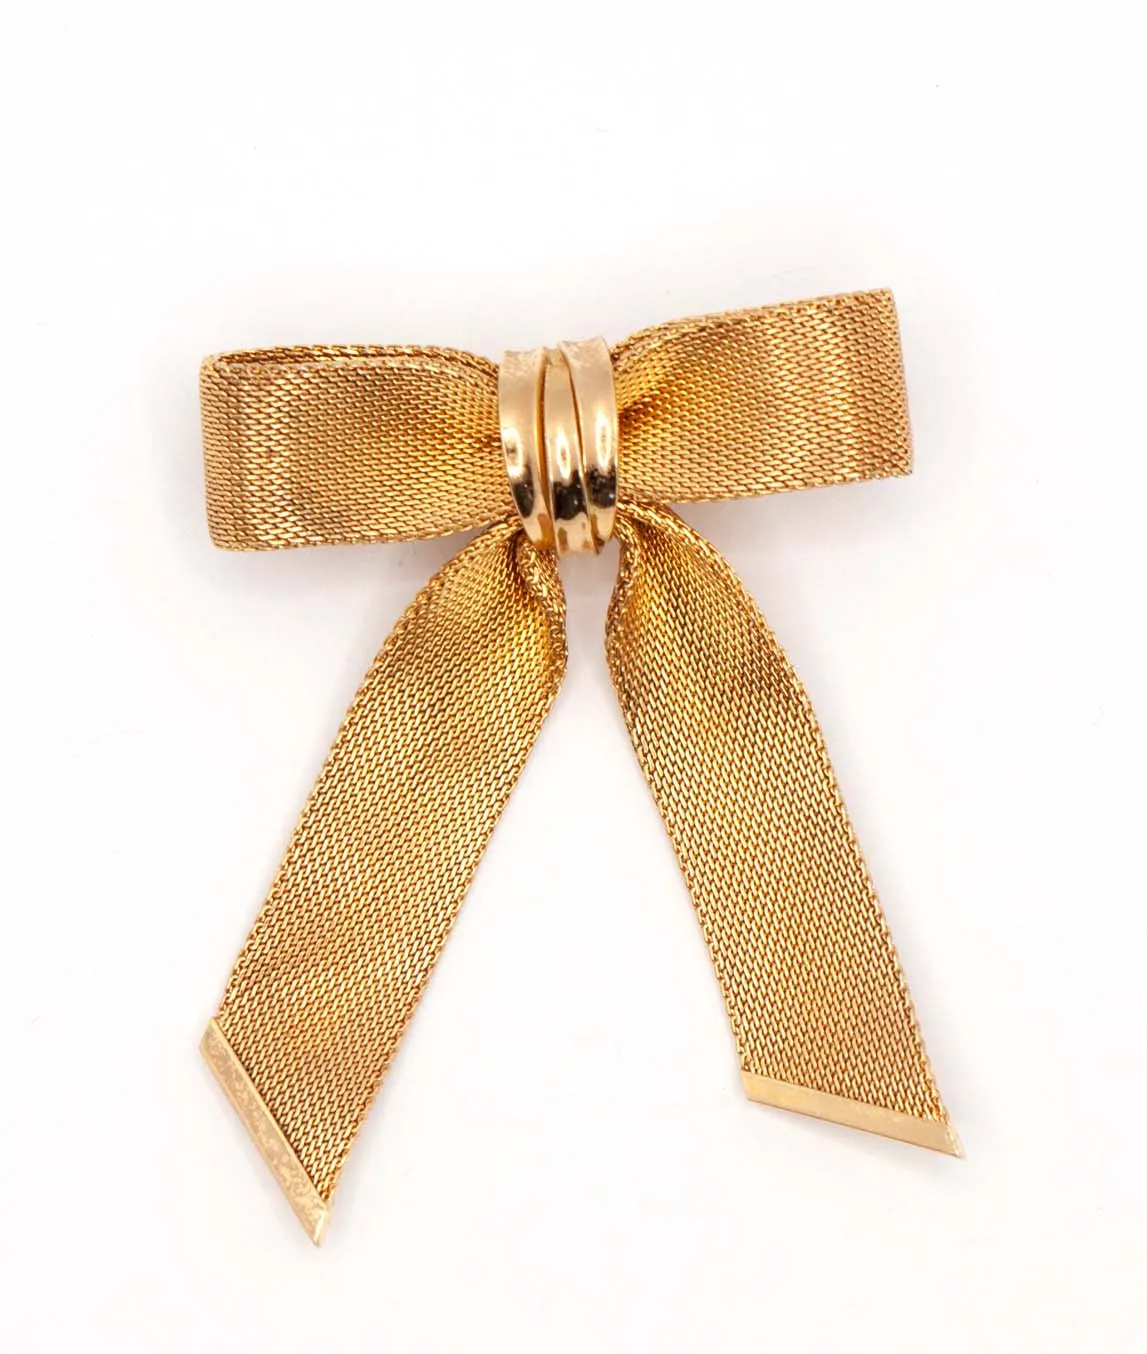 Christian Dior 1964 gold plated woven metal bow brooch